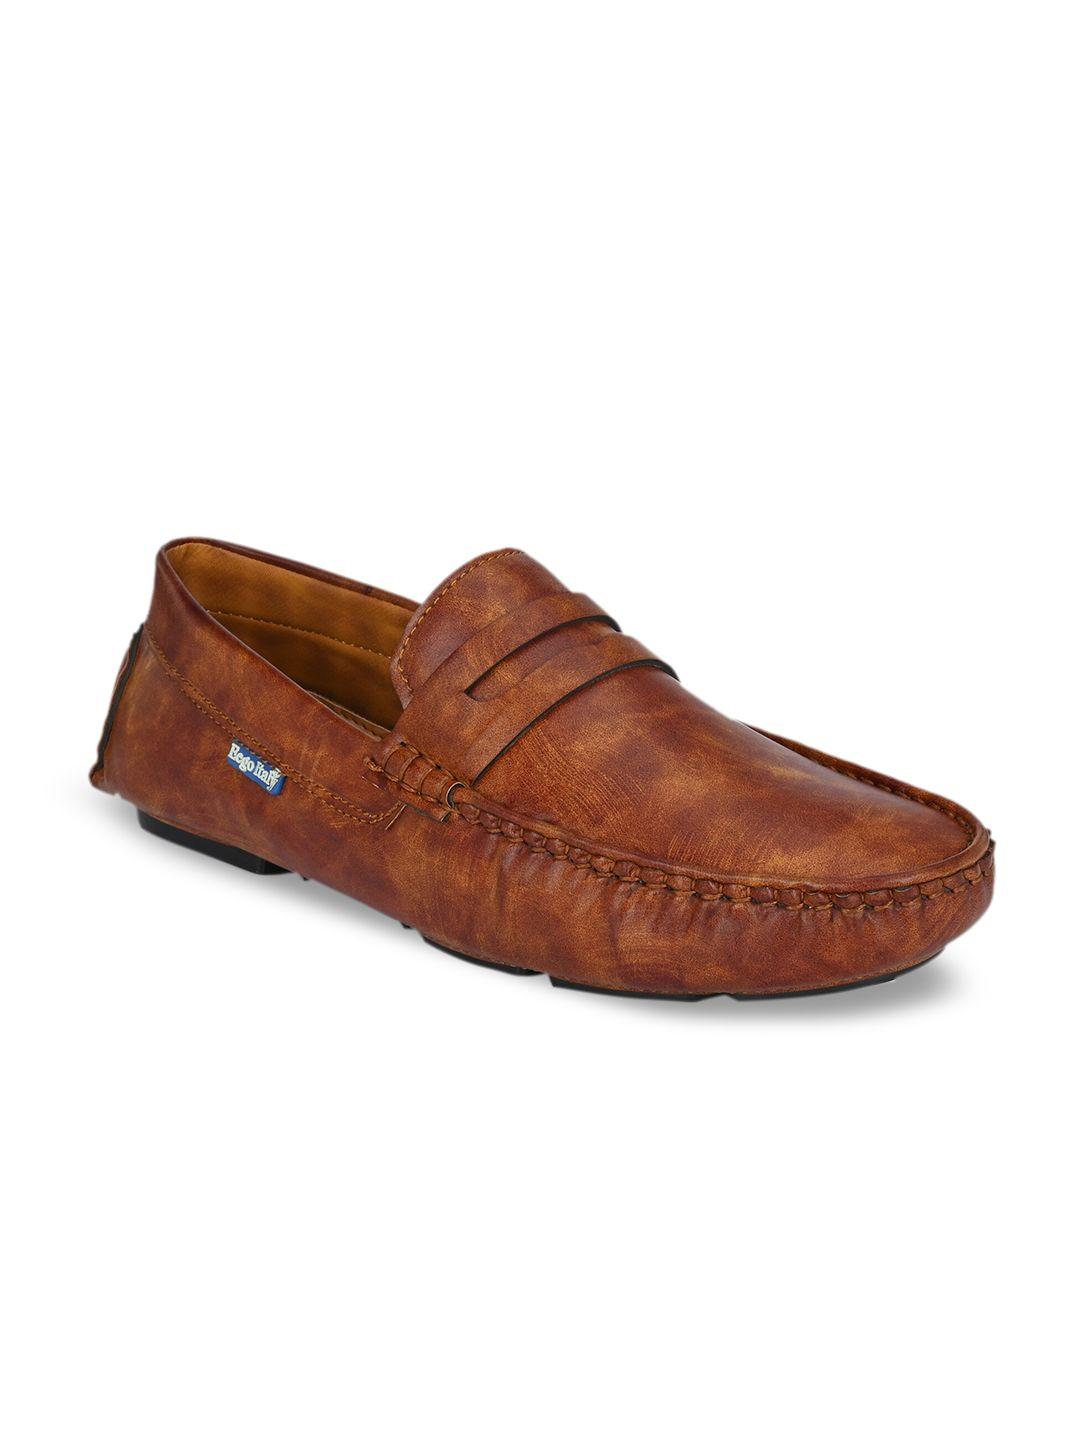 eego italy men tan penny loafers